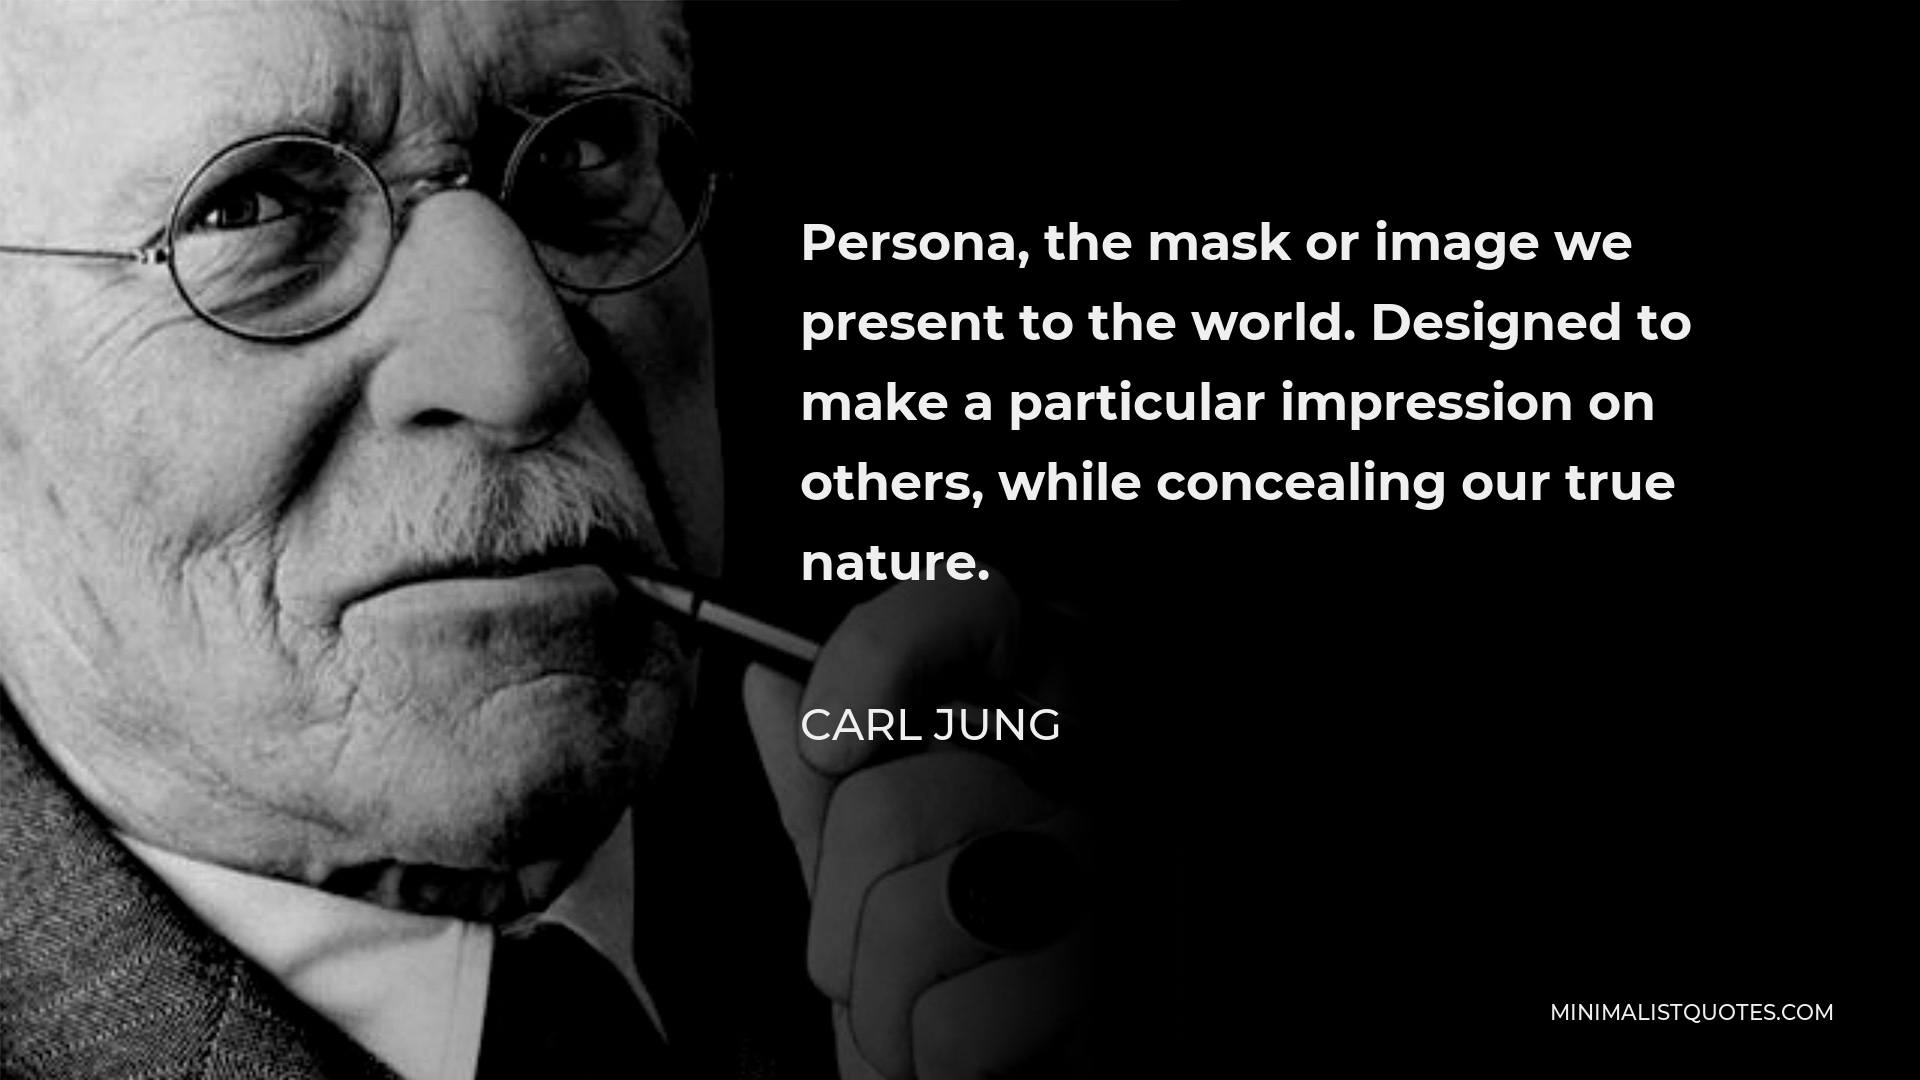 Carl Jung Quote - Persona, the mask or image we present to the world. Designed to make a particular impression on others, while concealing our true nature.